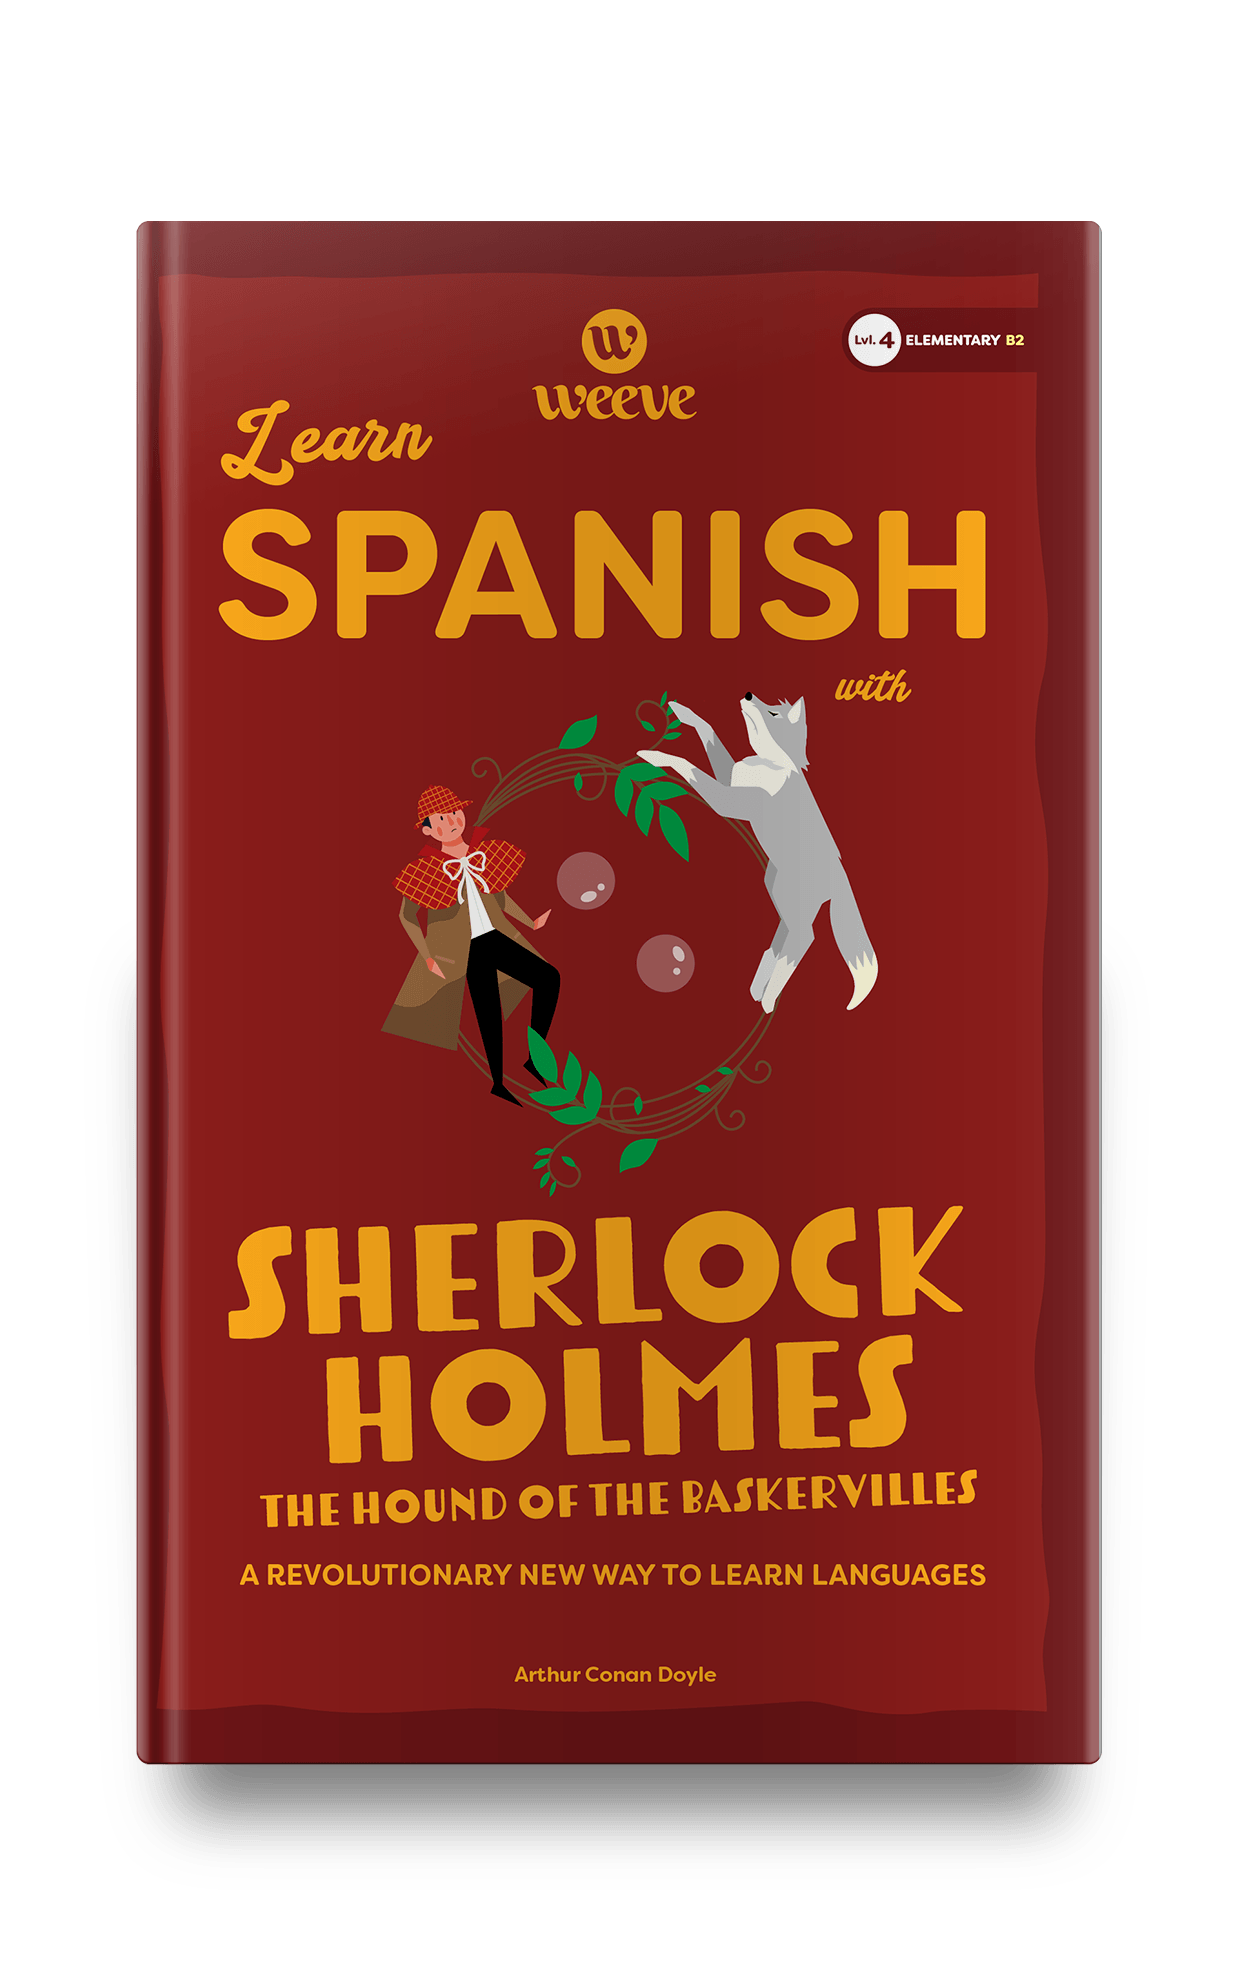 Learn Spanish with Sherlock Holmes The Hound of the Baskervilles - Weeve